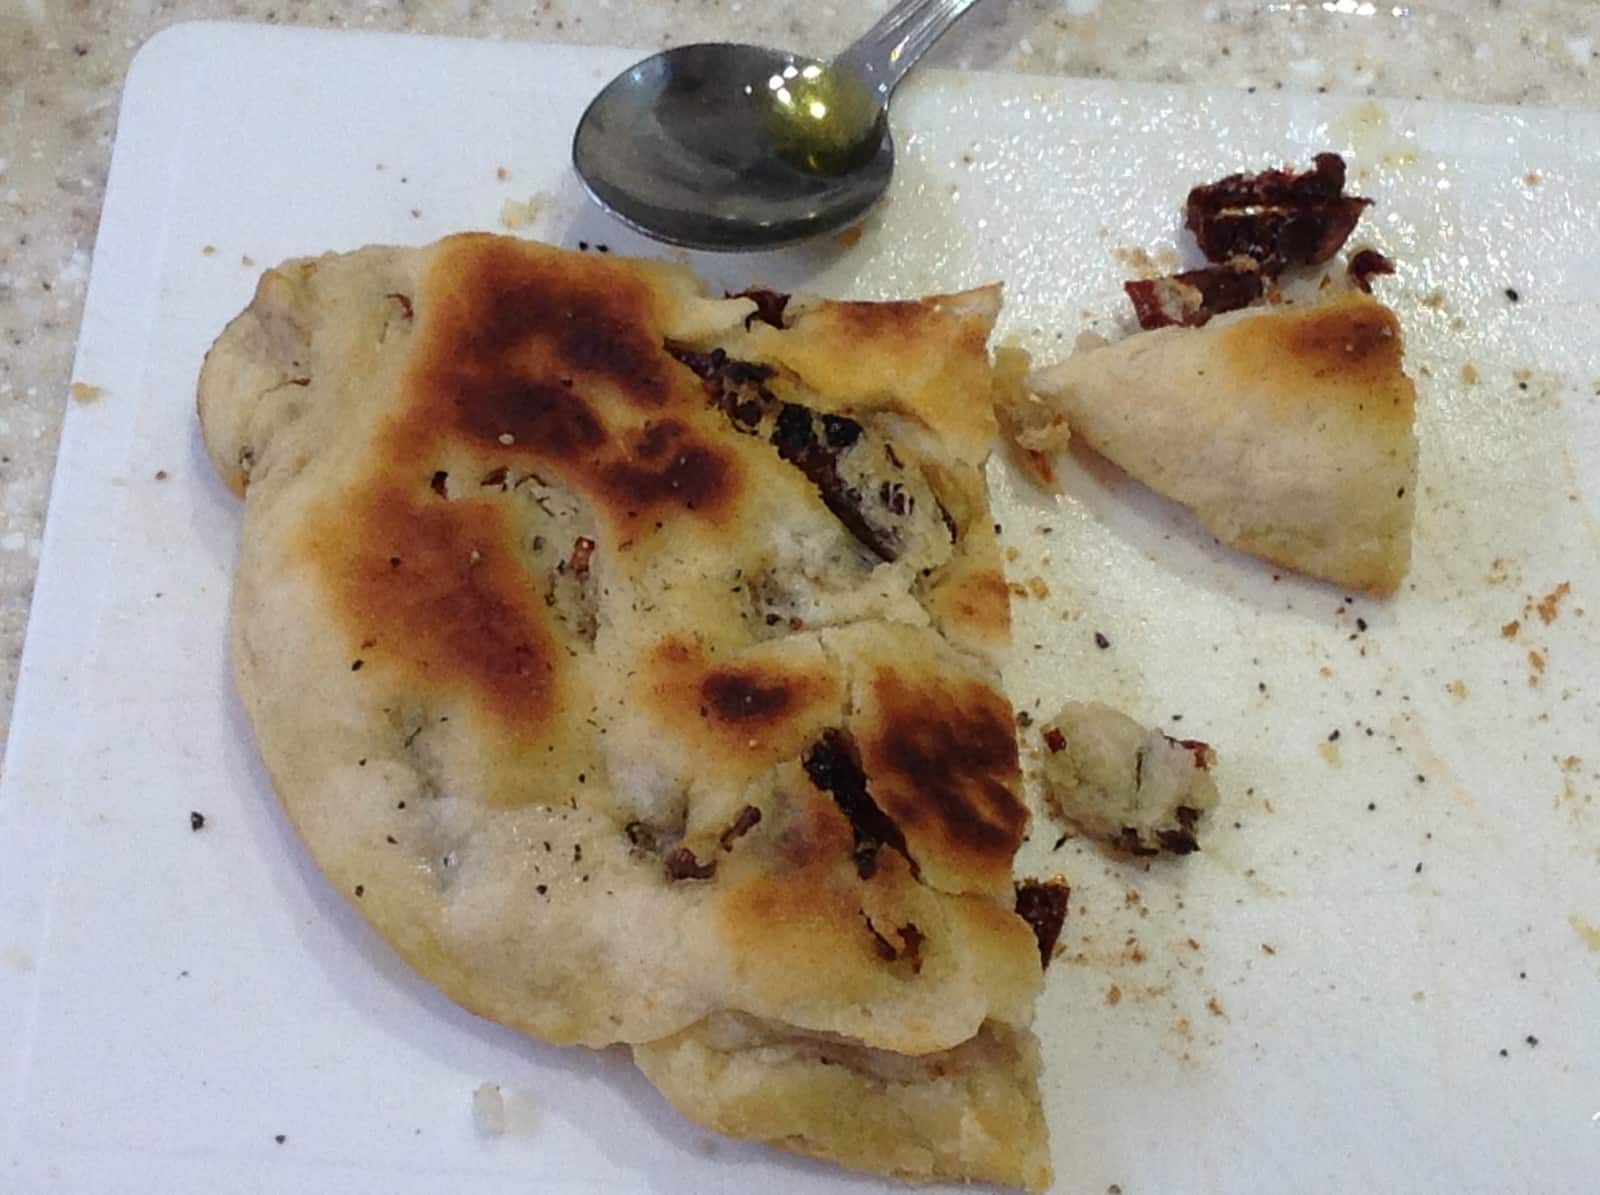 Instant focaccia for a very cheap meal 